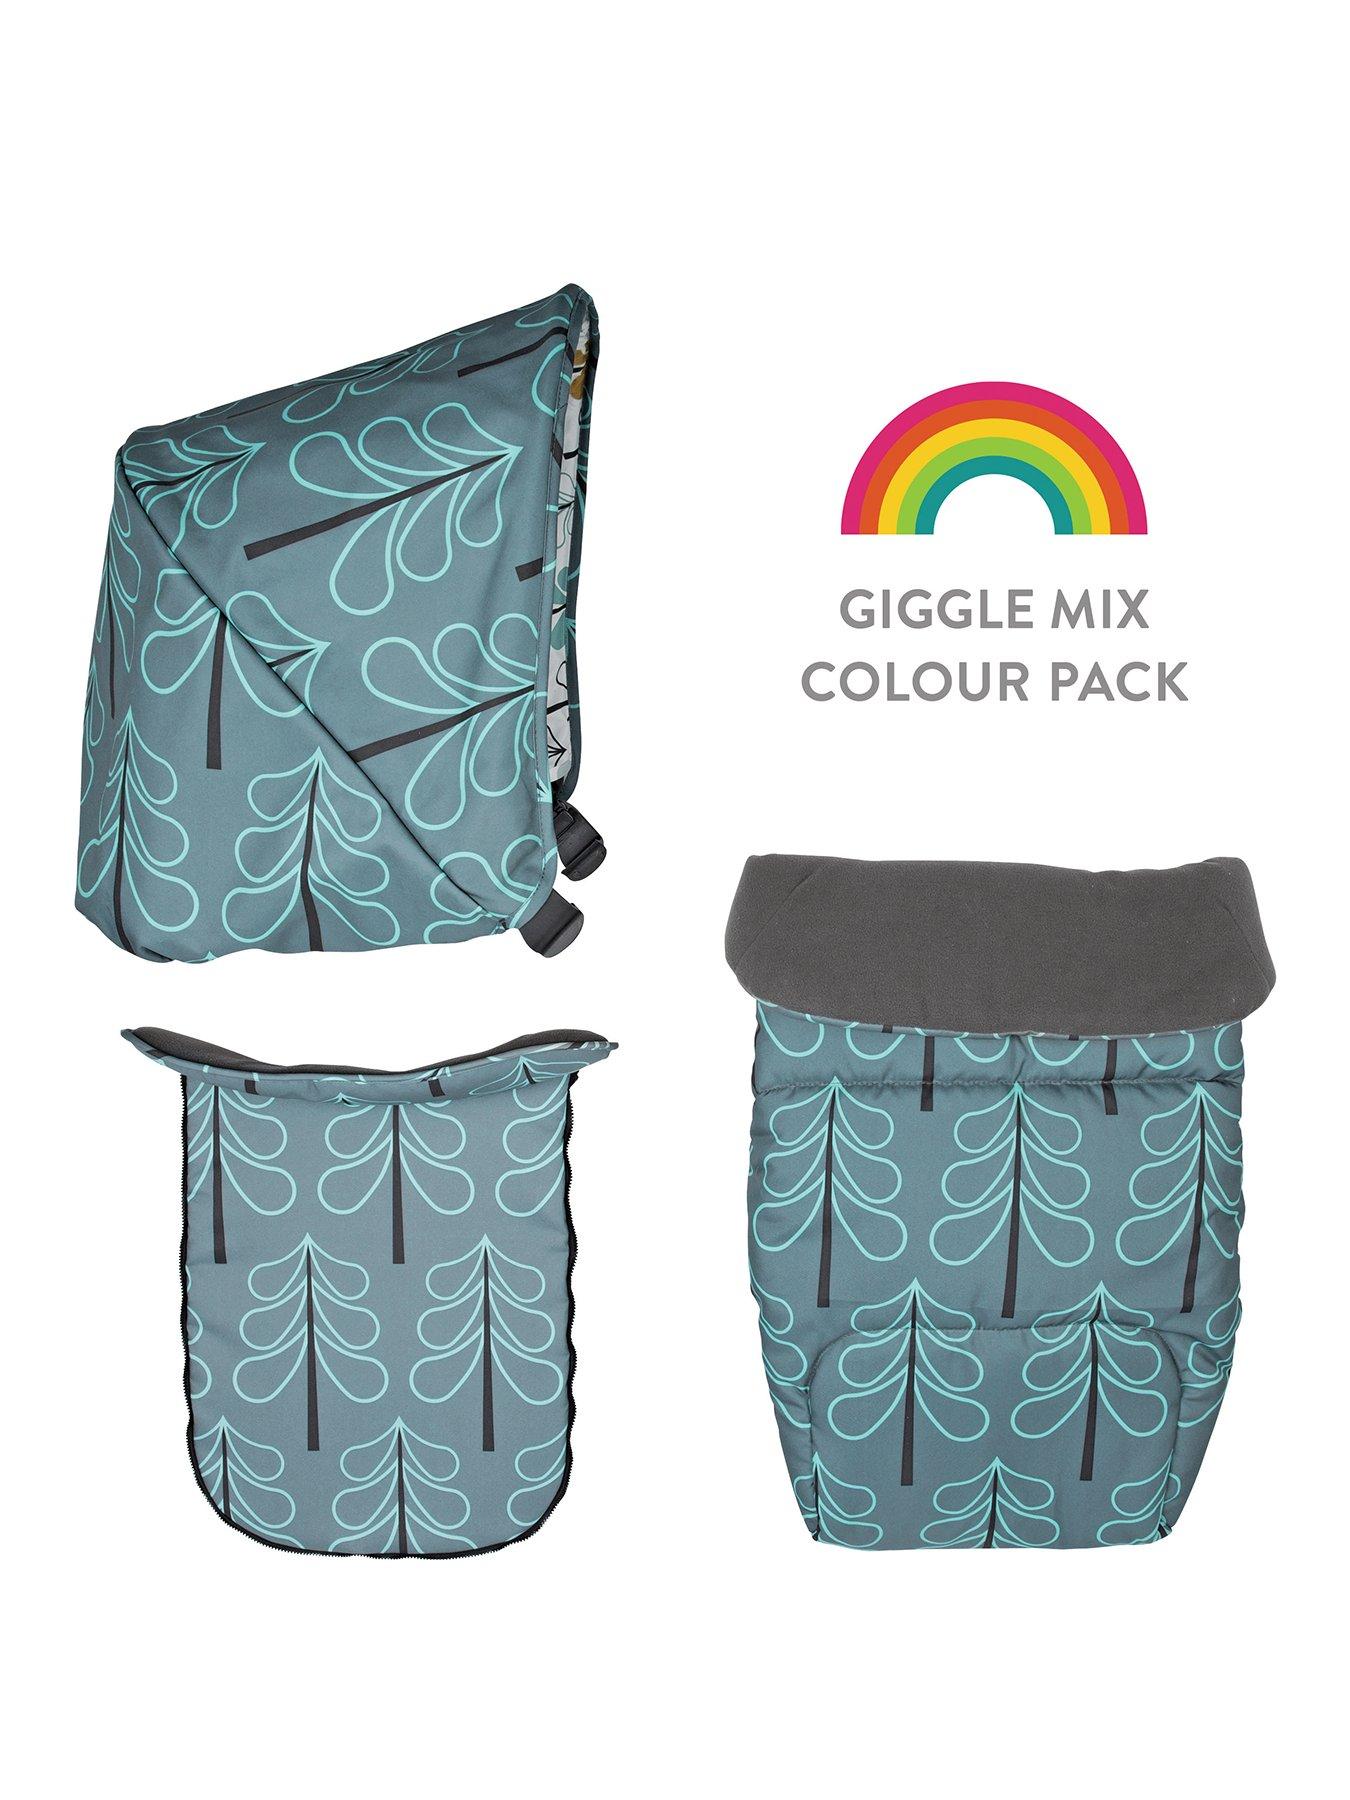 Cosatto Giggle Mix Colour Pack Use On Pram Pushchair - color changing vans shirt logo changes roblox